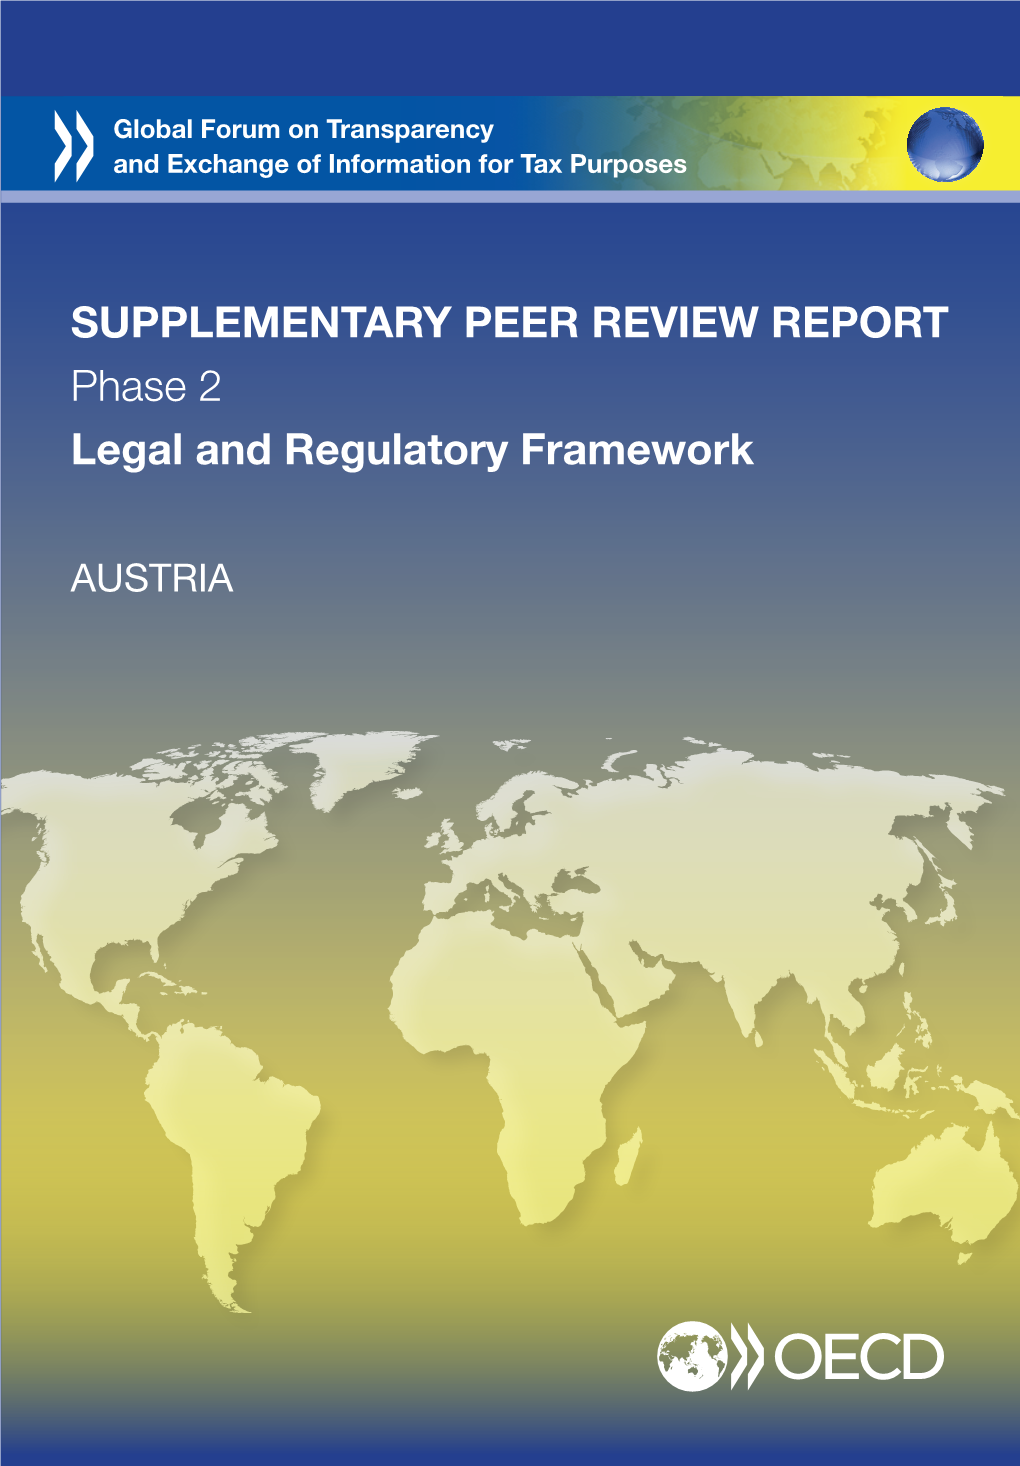 Phase 2 Supplementary Report for Austria